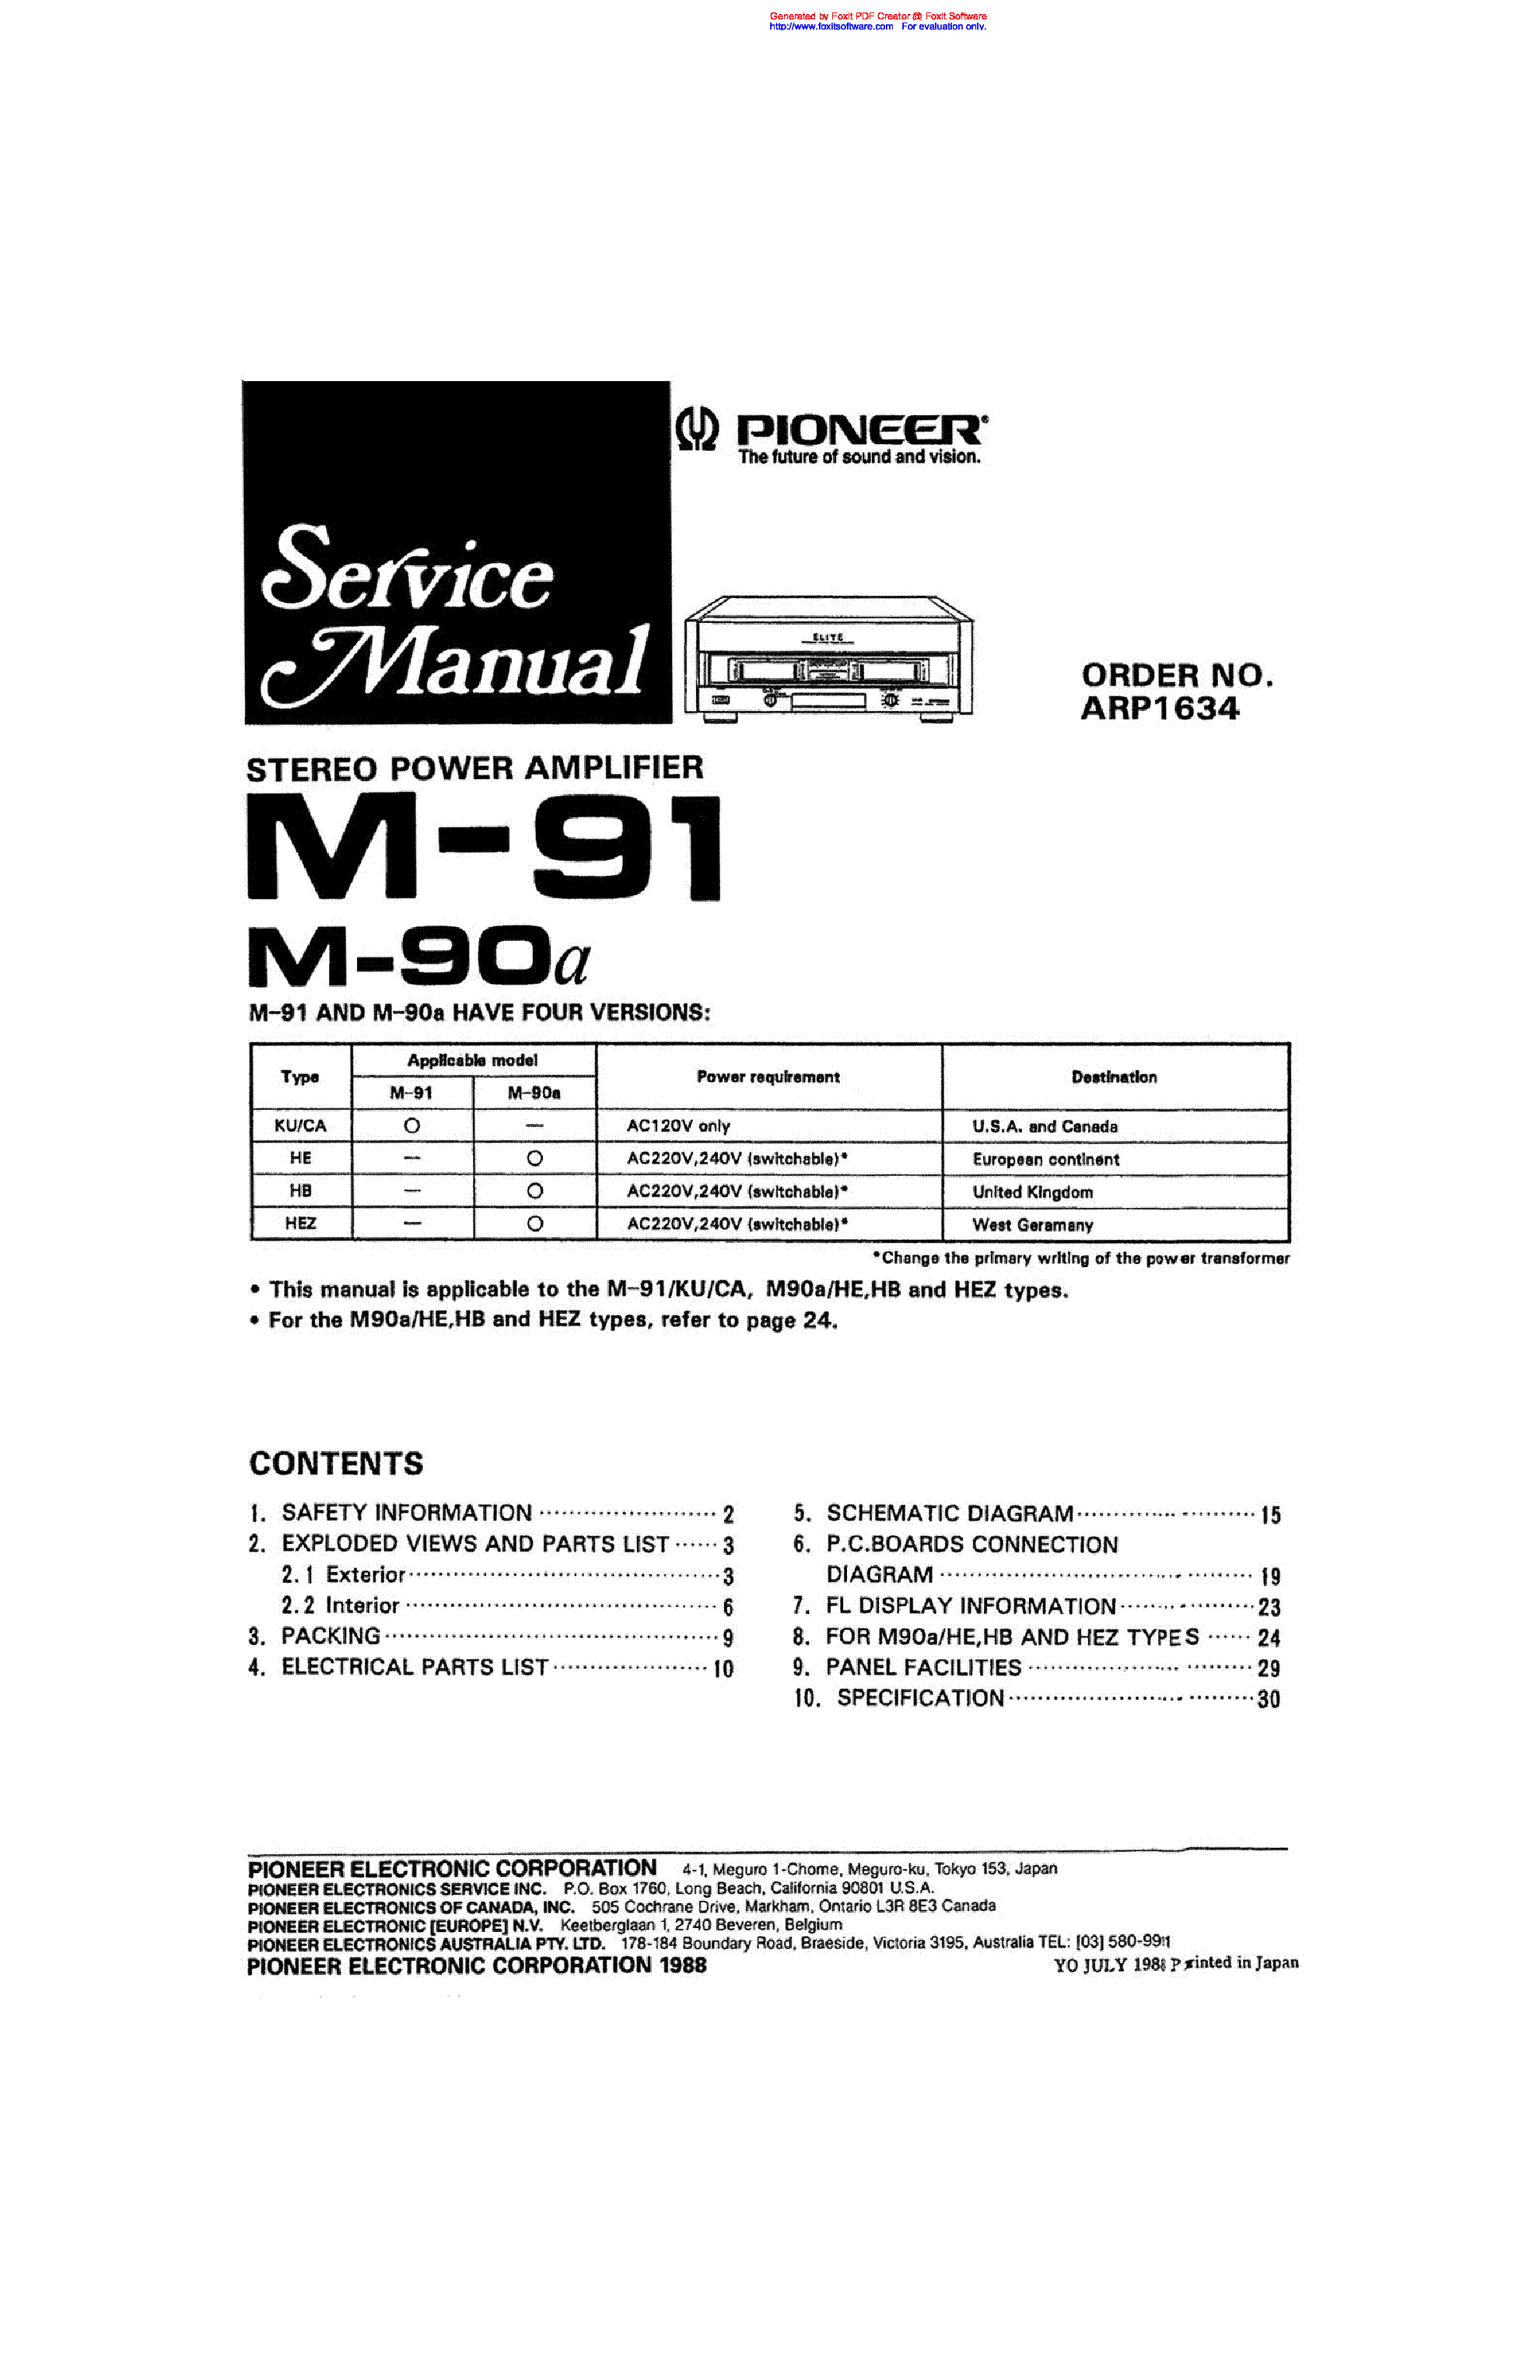 PIONEER M-90A 91 SM service manual (1st page)